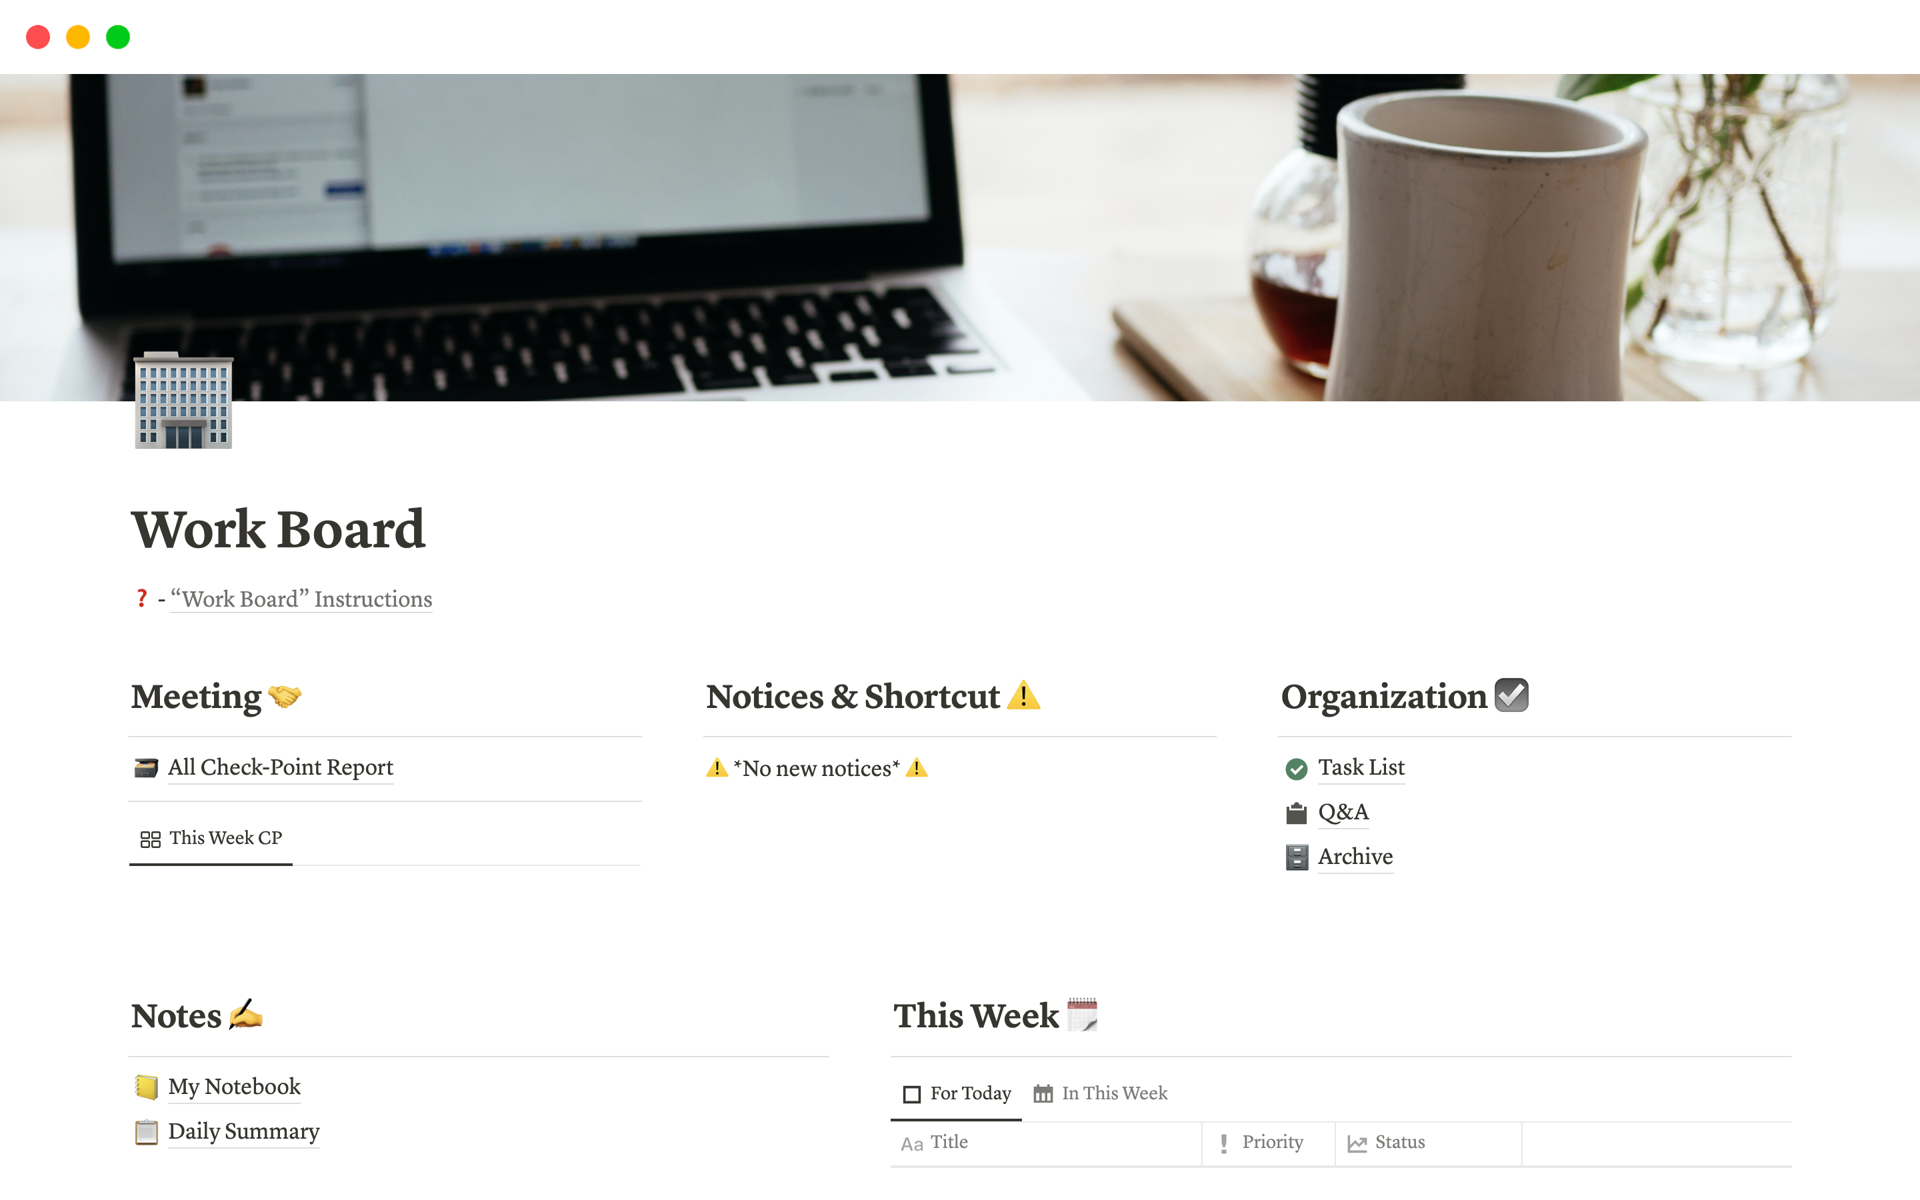 "Work Board" is a compact and easy-to-use Template to manage better work productivity